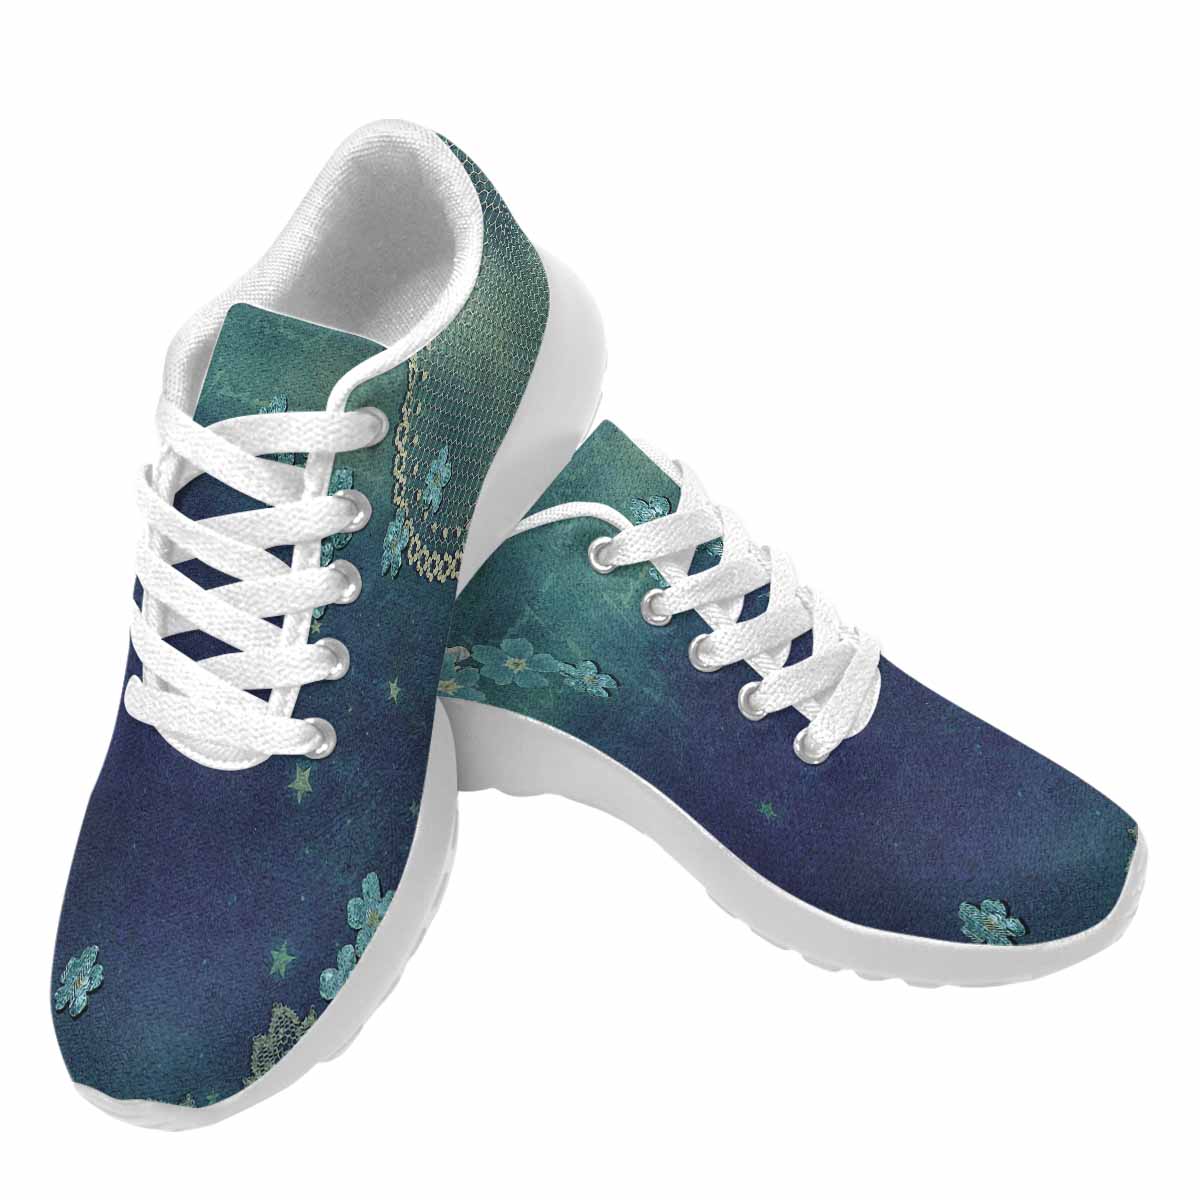 Victorian lace print, womens cute casual or running sneakers, design 04